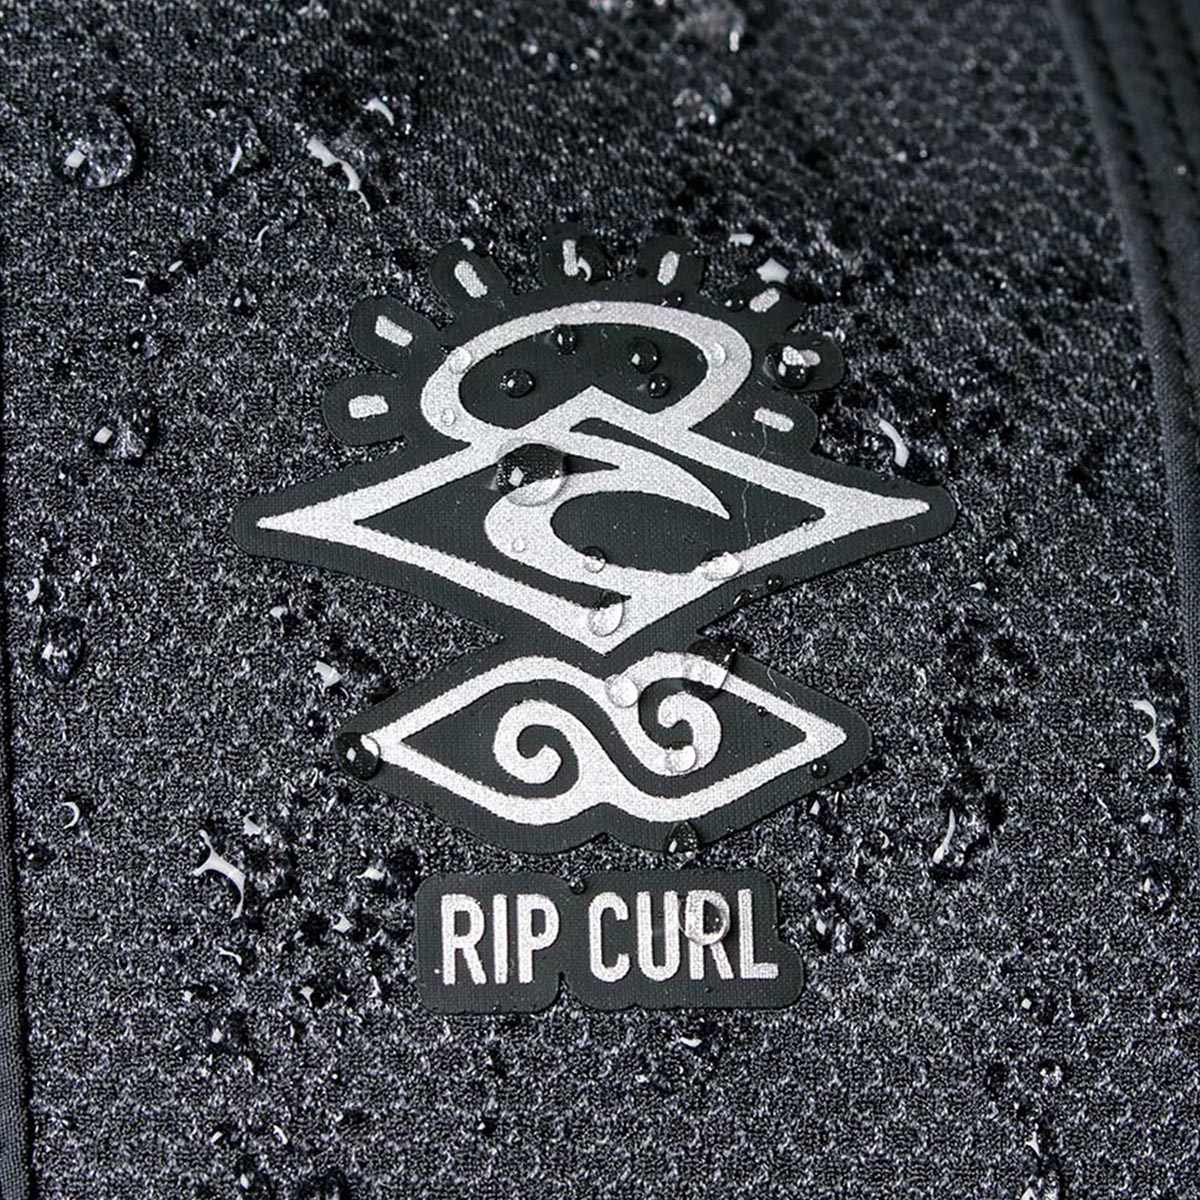 RIP CURL - MIRAGE 3/2/1 ULTIMATE